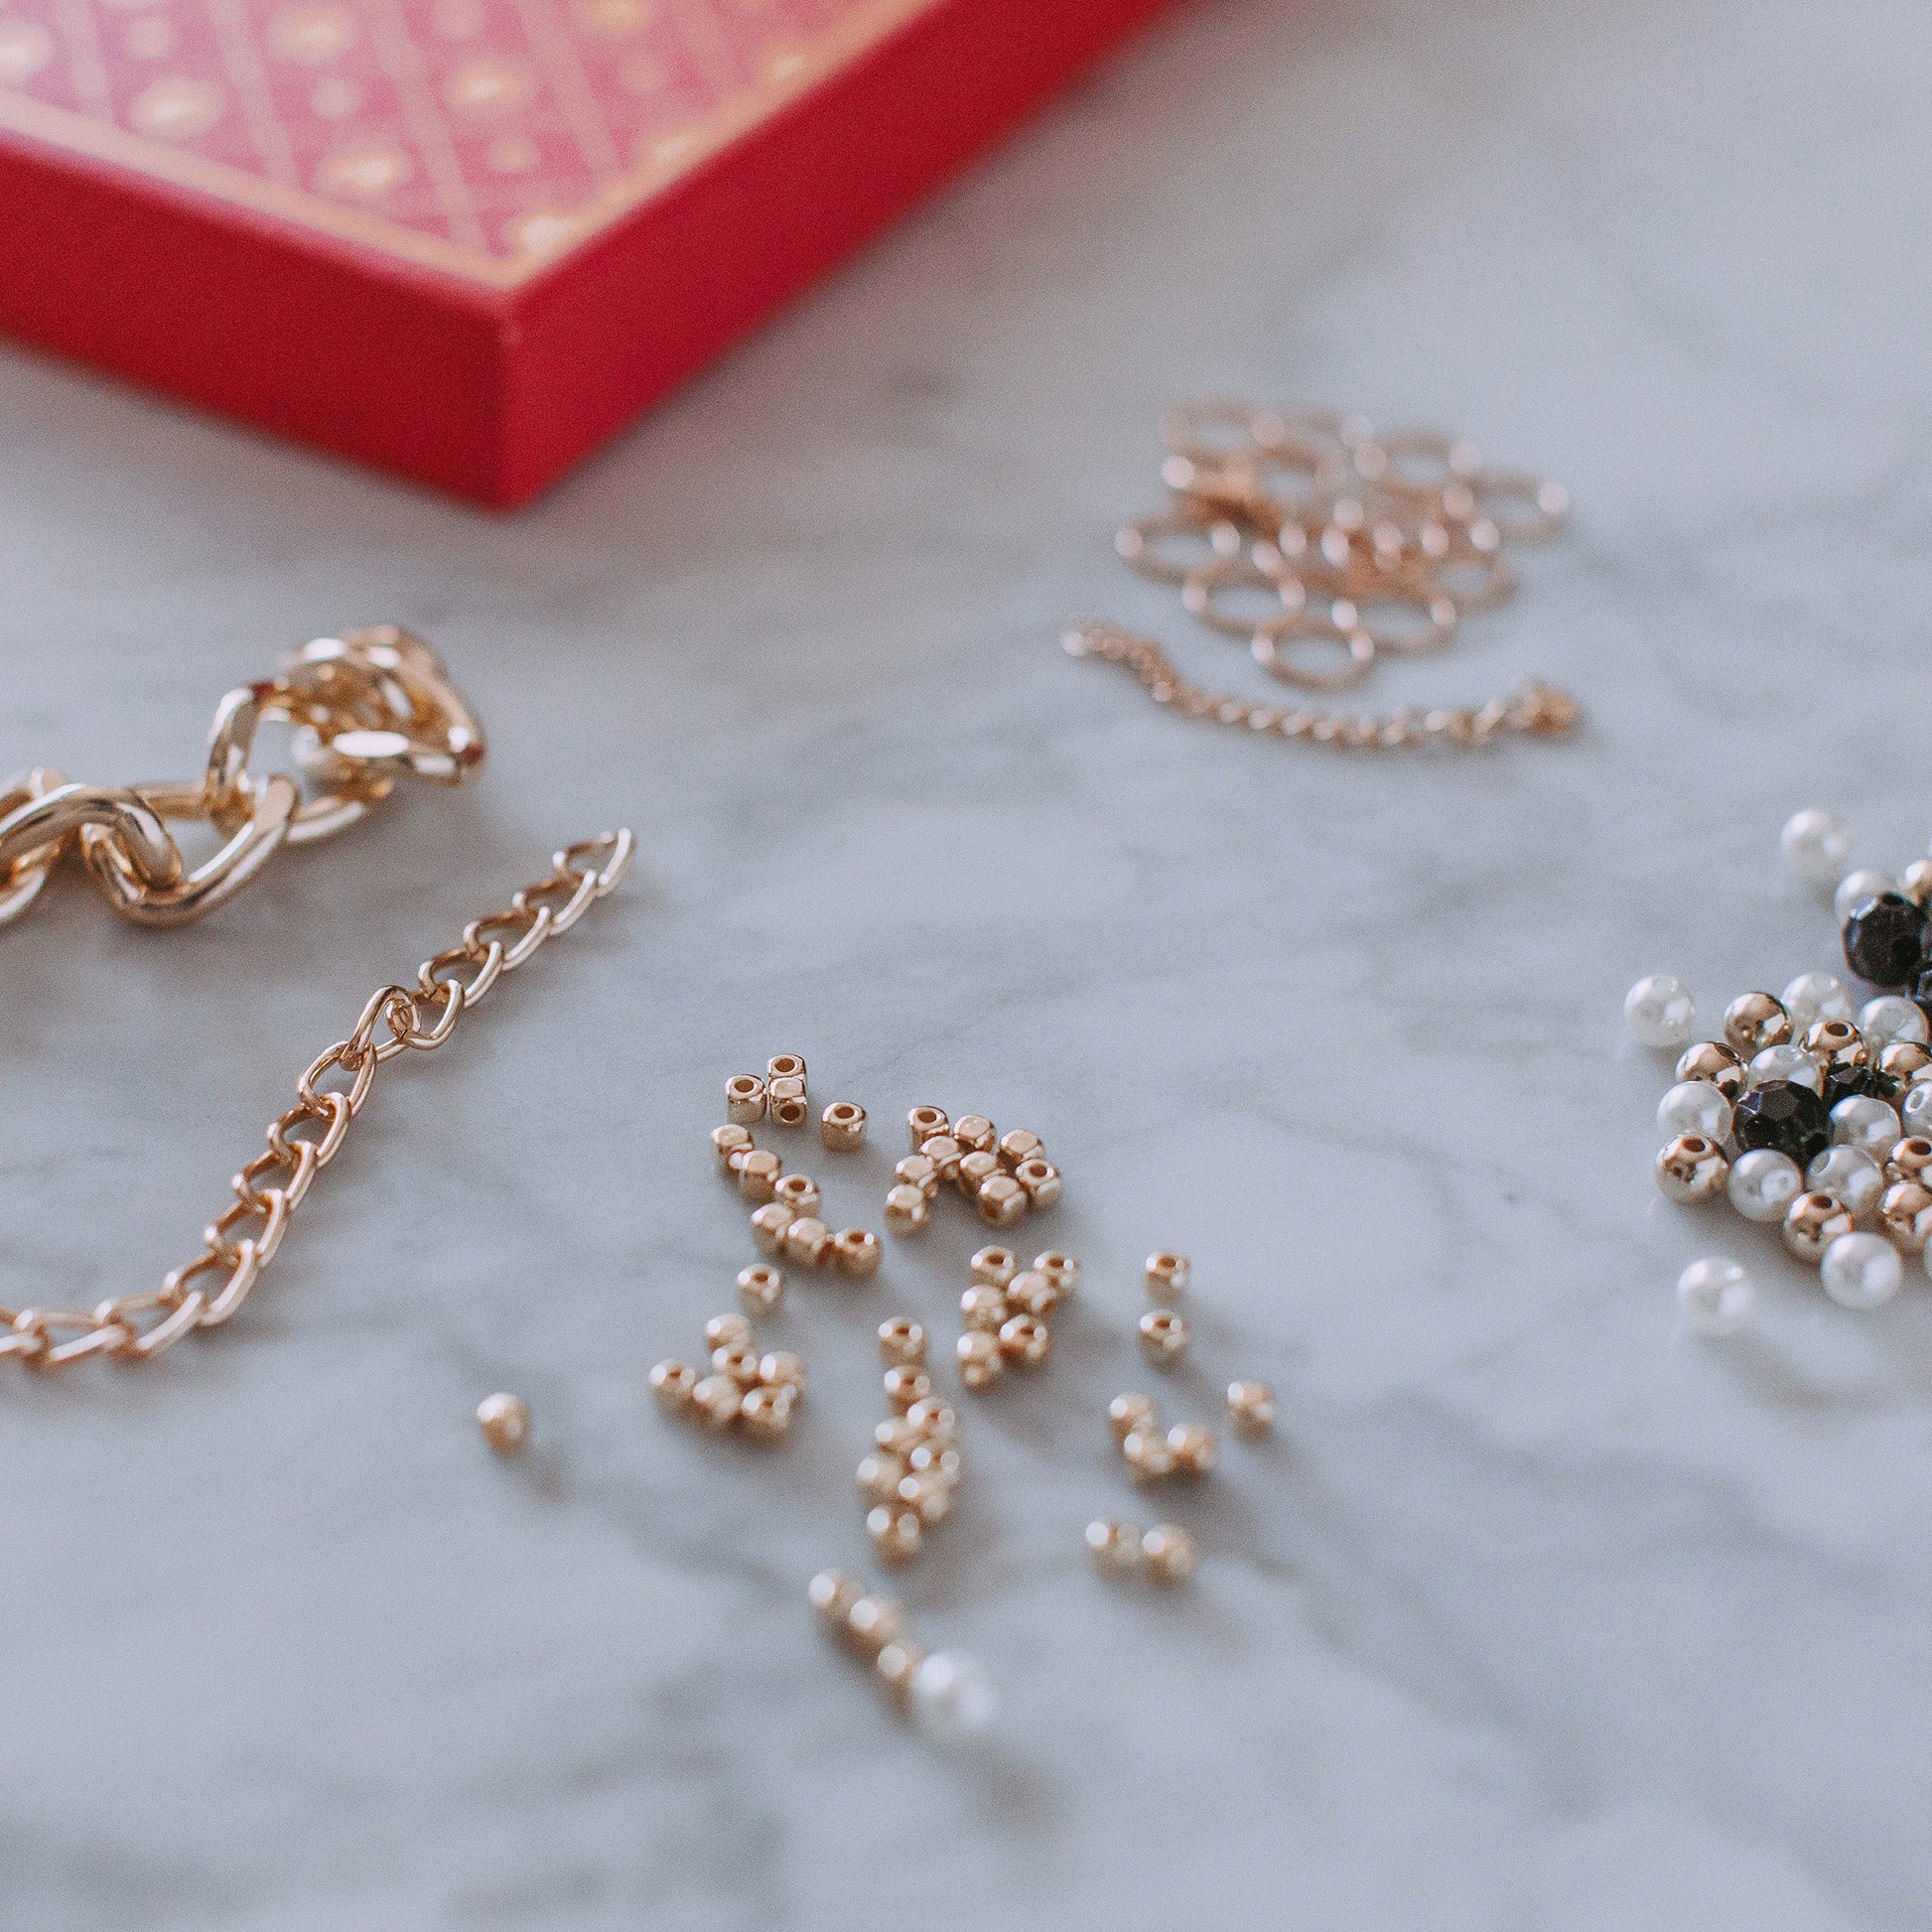 Find the Make It Real™ Juicy Couture DIY Chains & Charms Kit at Michaels